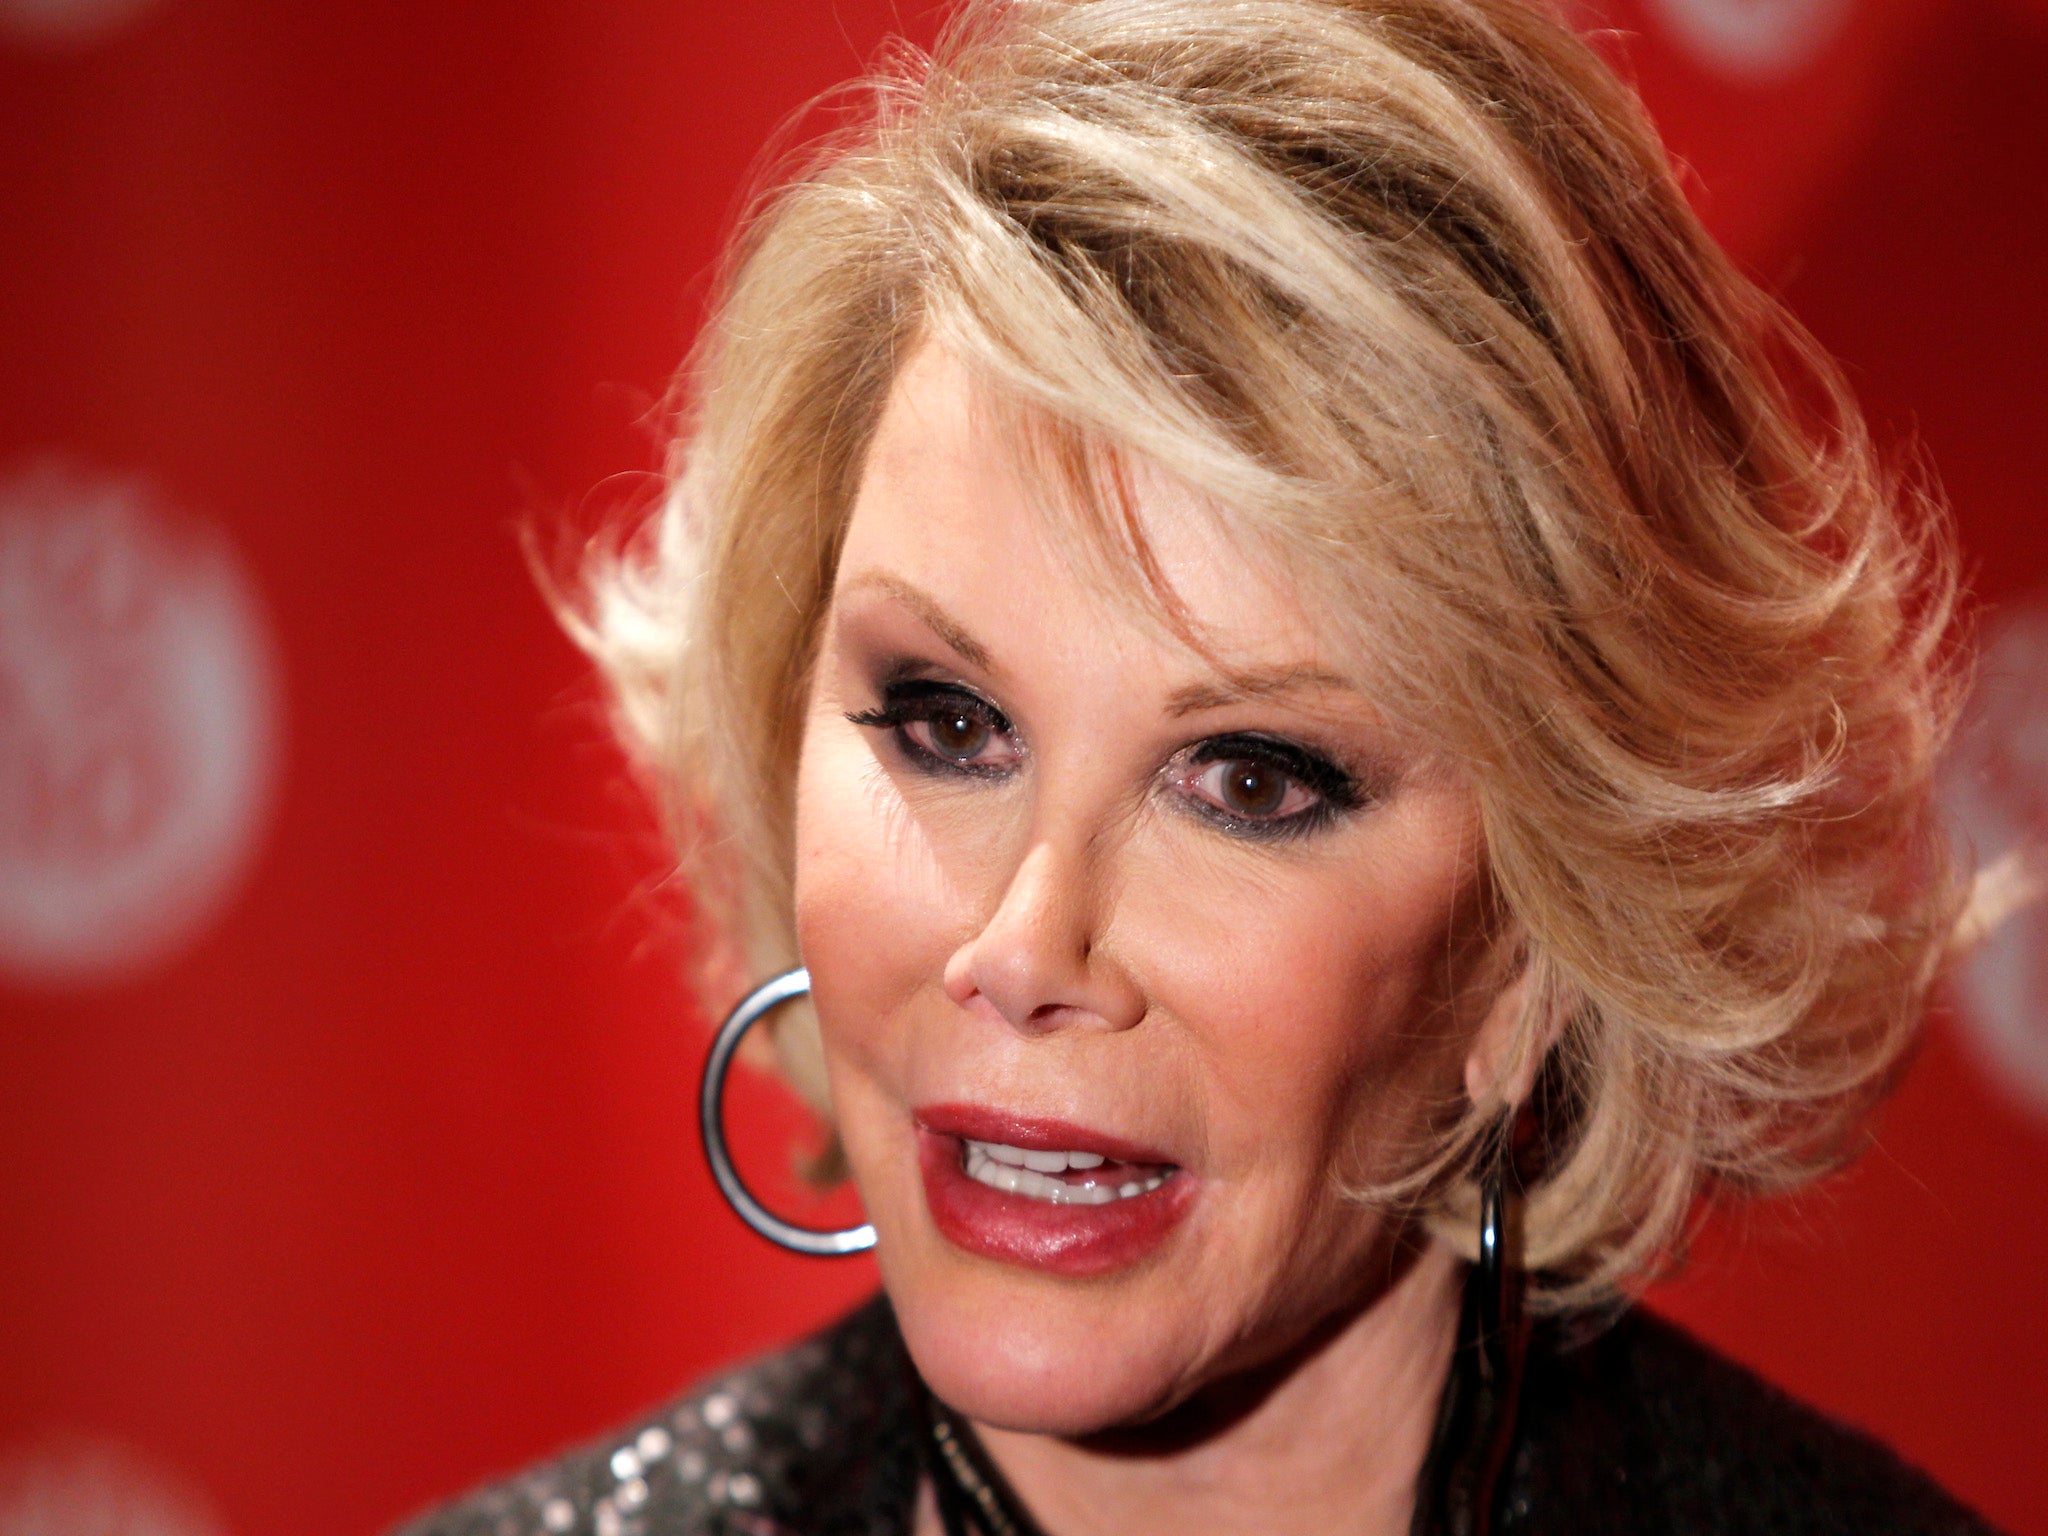 ‘I wasn’t allowed to say I was pregnant,’ said Joan Rivers, who died in 2014, in a 2007 interview